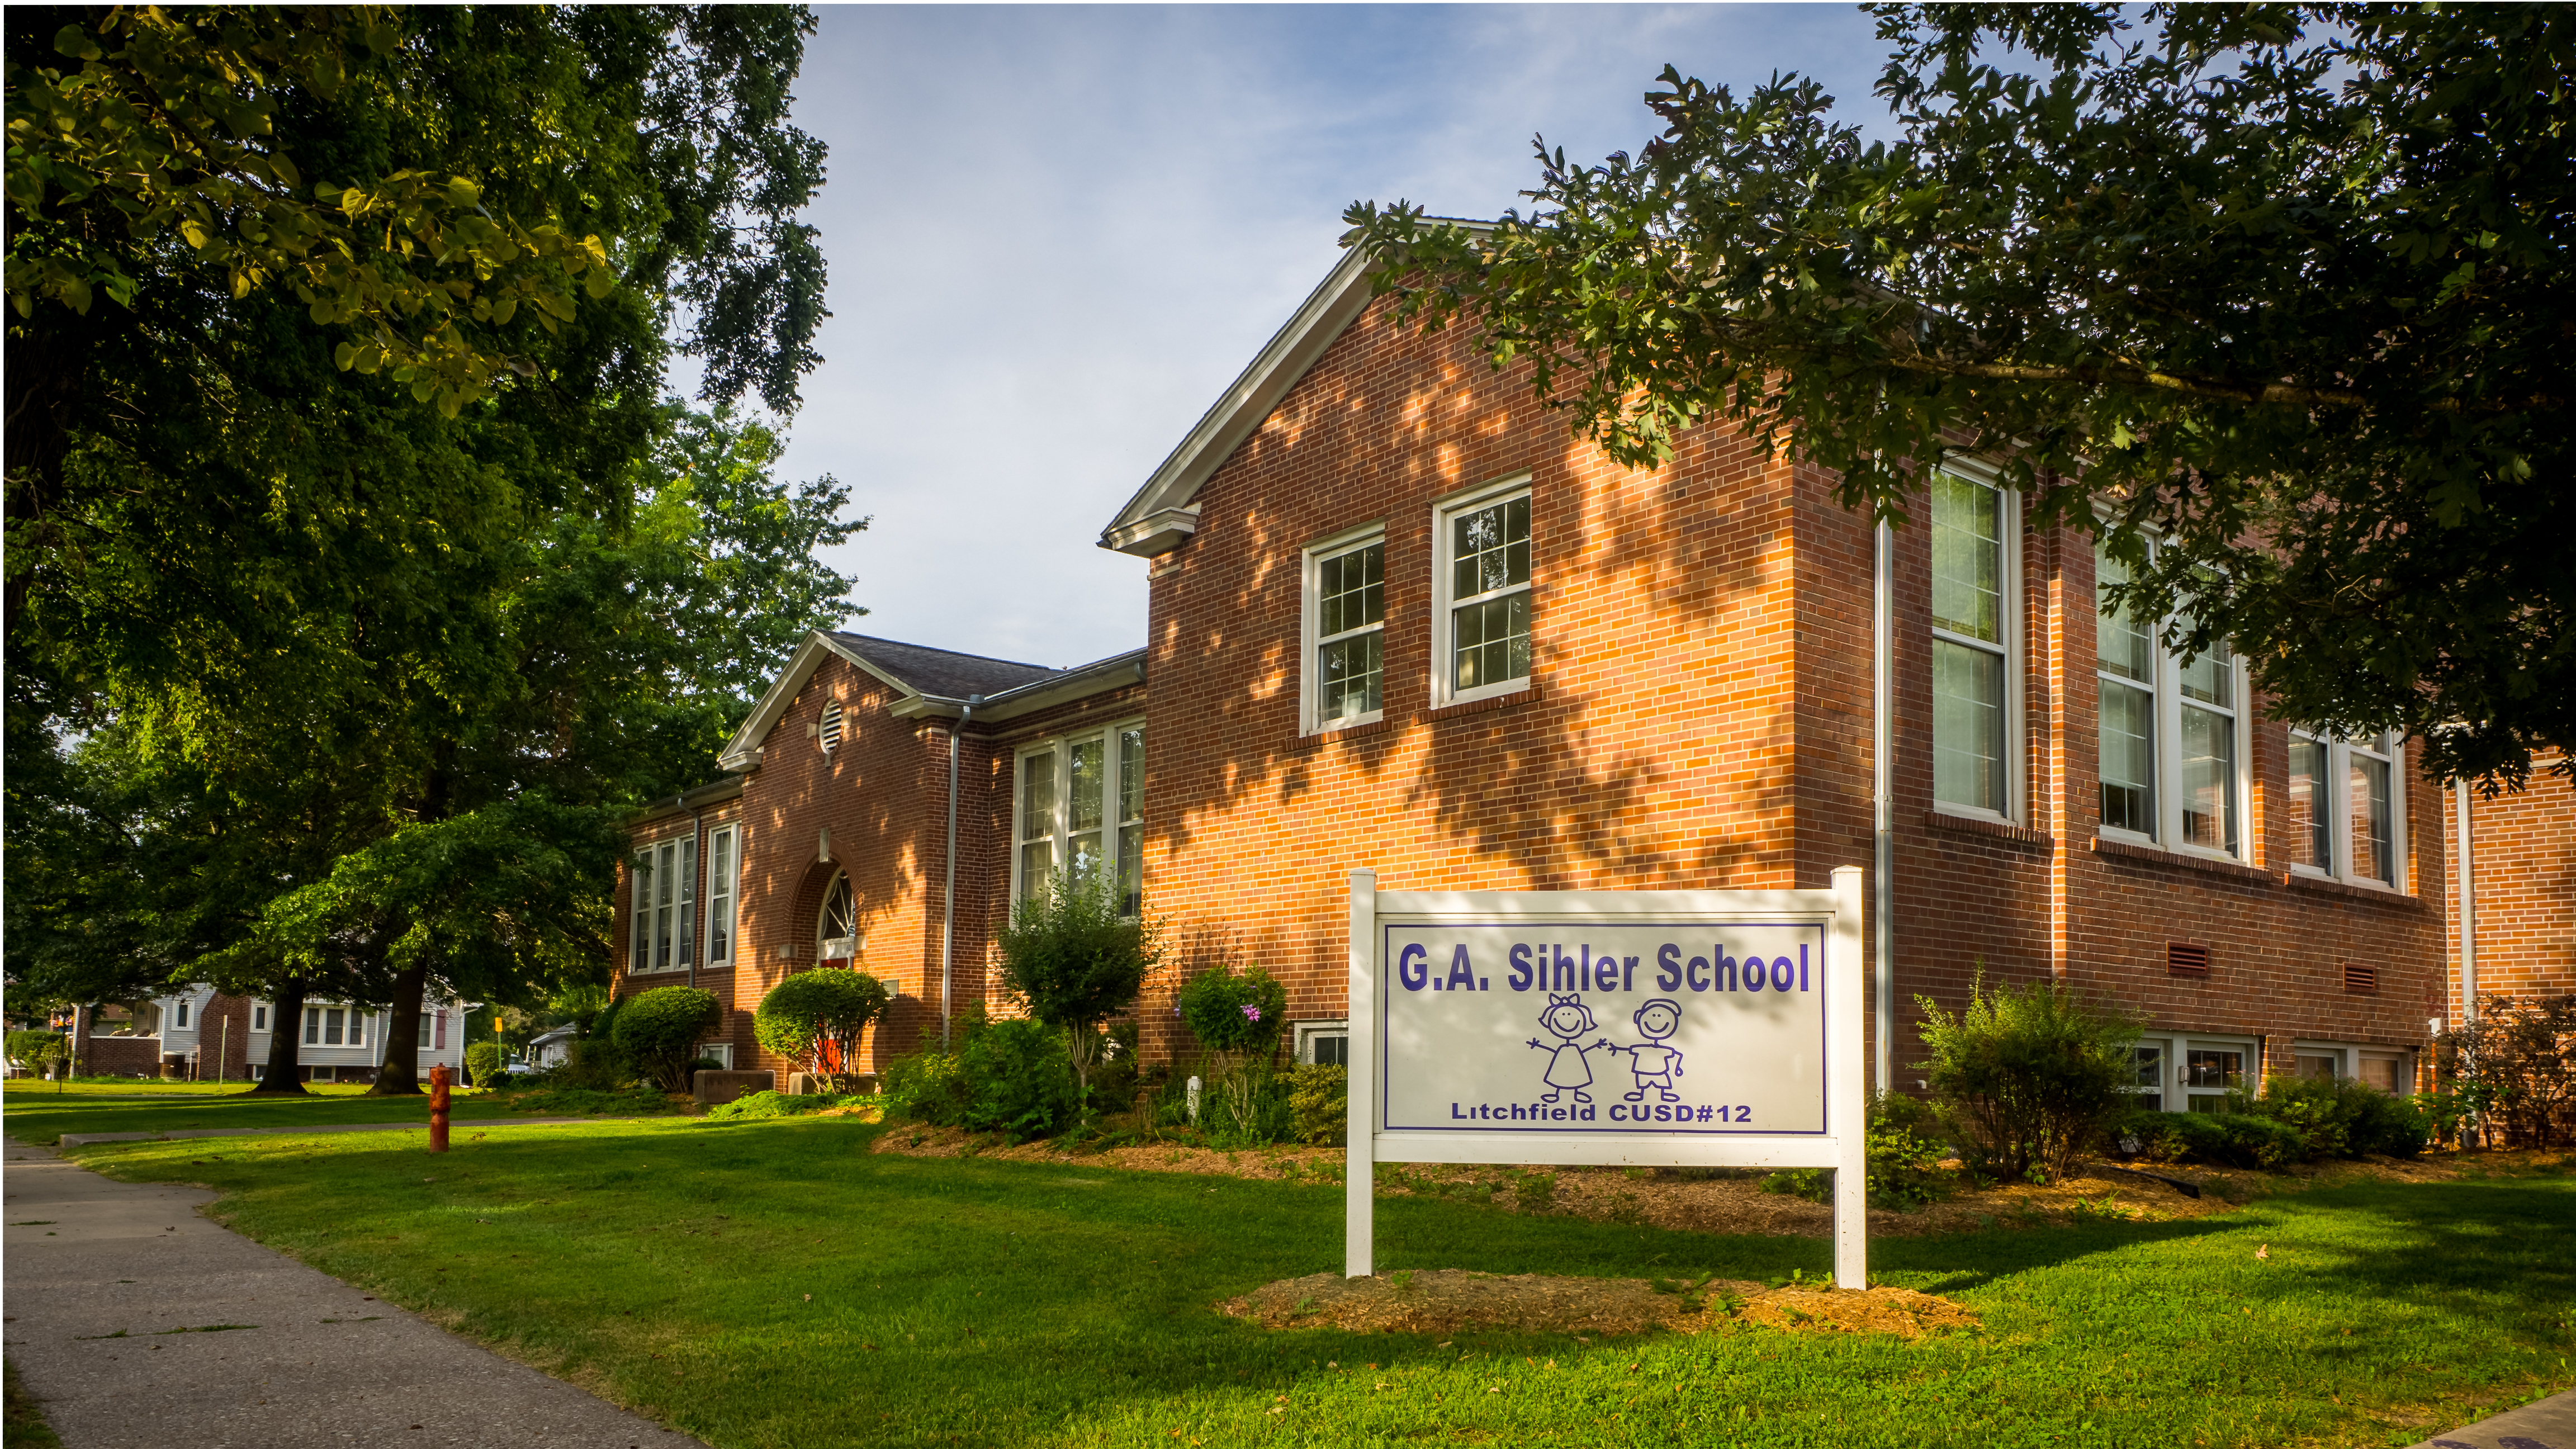 Exterior sunny morning image of Sihler School building